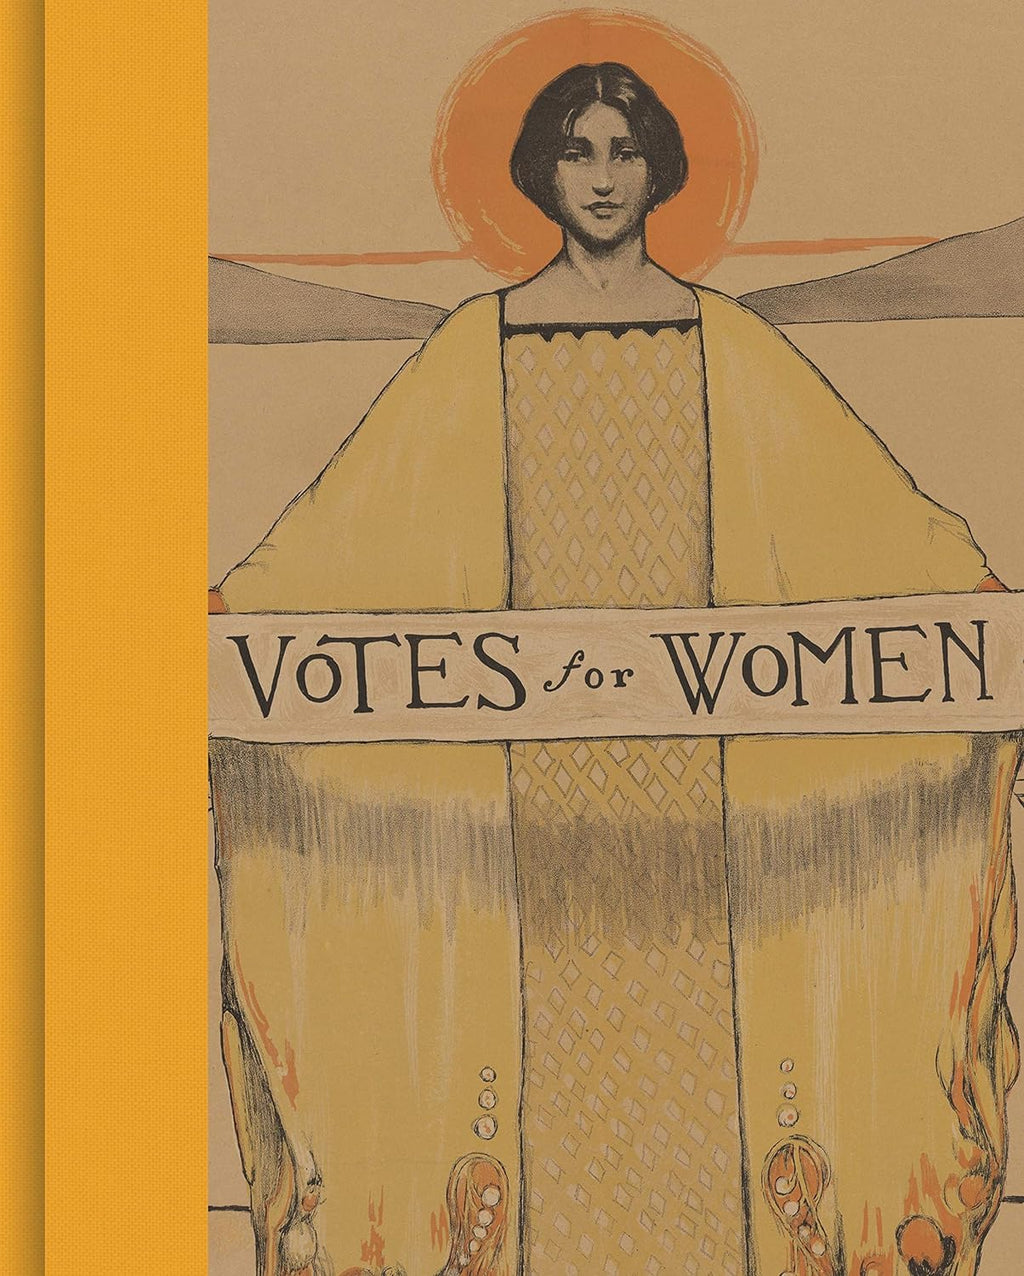 Votes for Women: A Portrait of Persistence